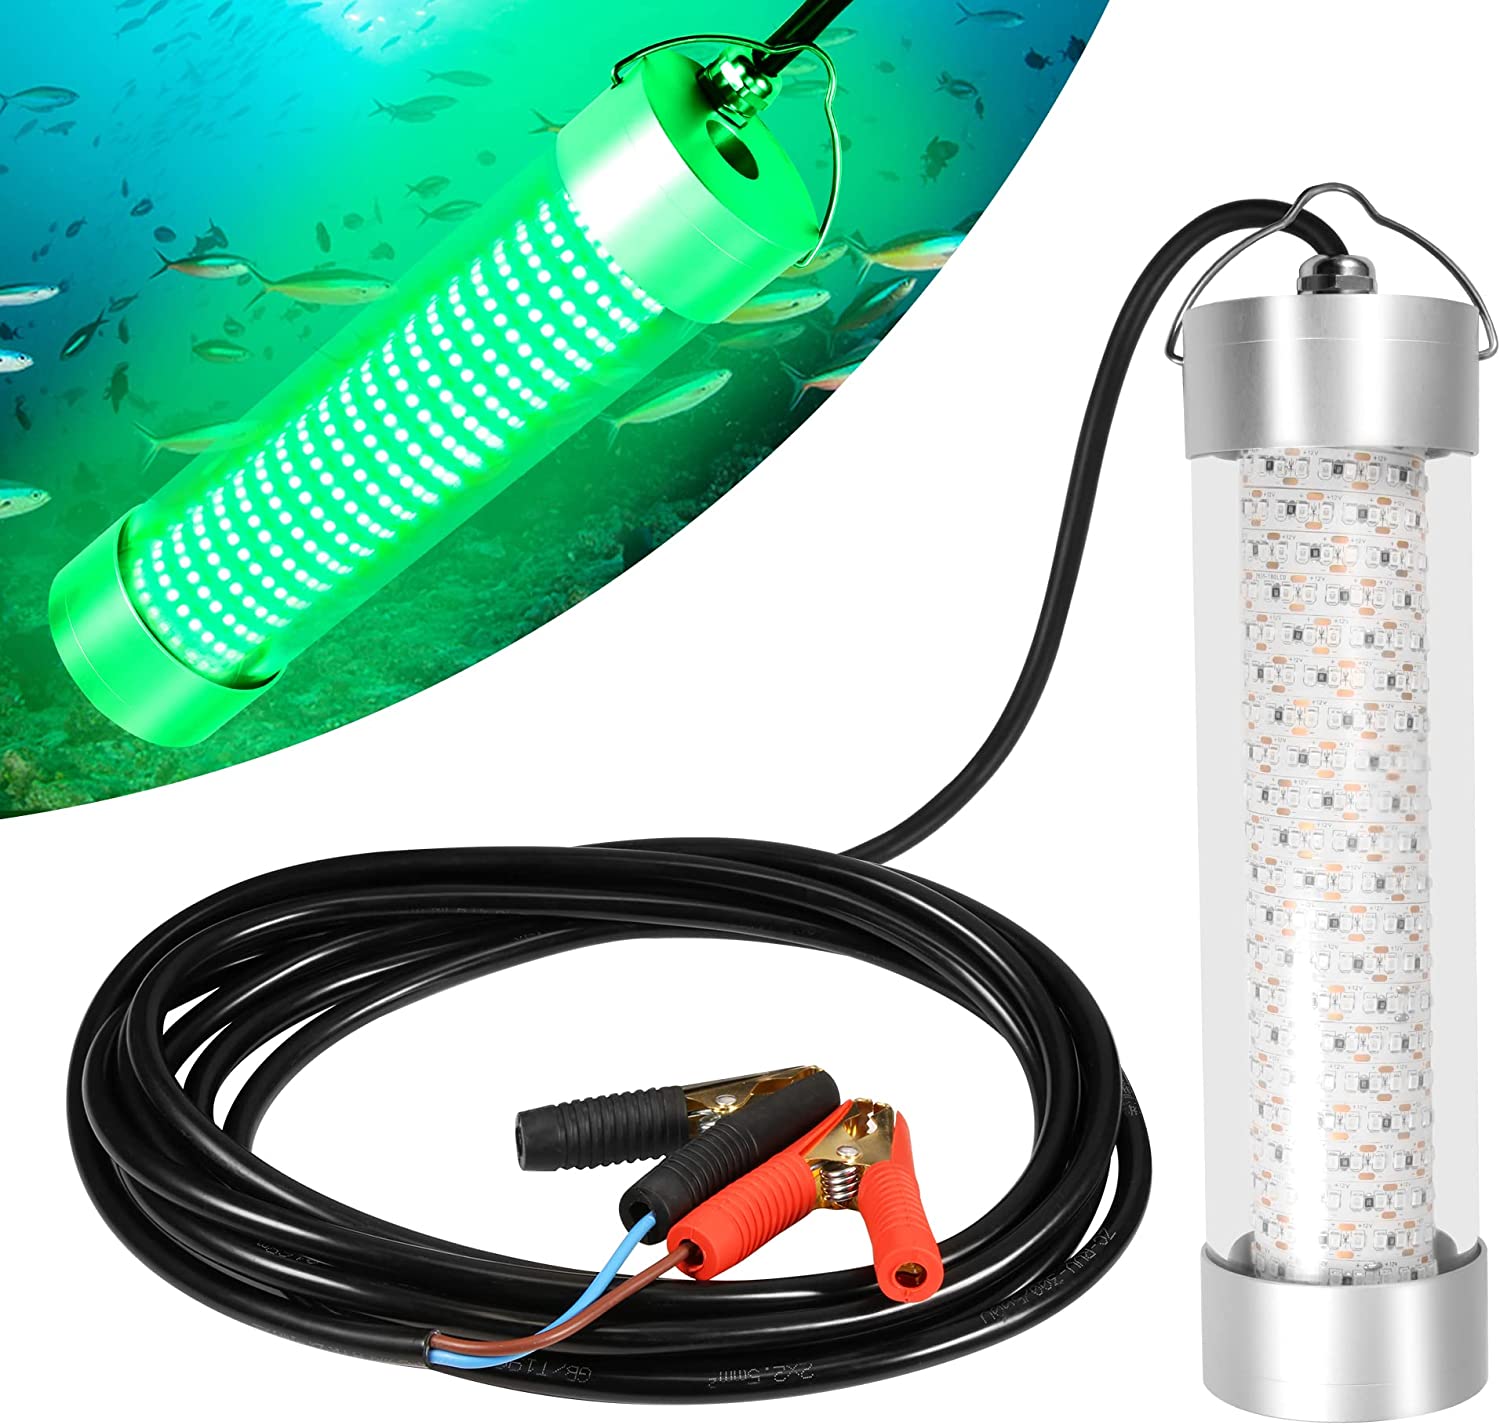 HUSUKU LED Underwater Fishing Light, 10000~80000lm 100W / 300W / 400W /  800W, 12V / 110V / 220V Green Night Fishing Attractor IP68 Submersible Lamp  for Crappie Snook Squid Shrimp, 49ft/33ft/16ft Wire